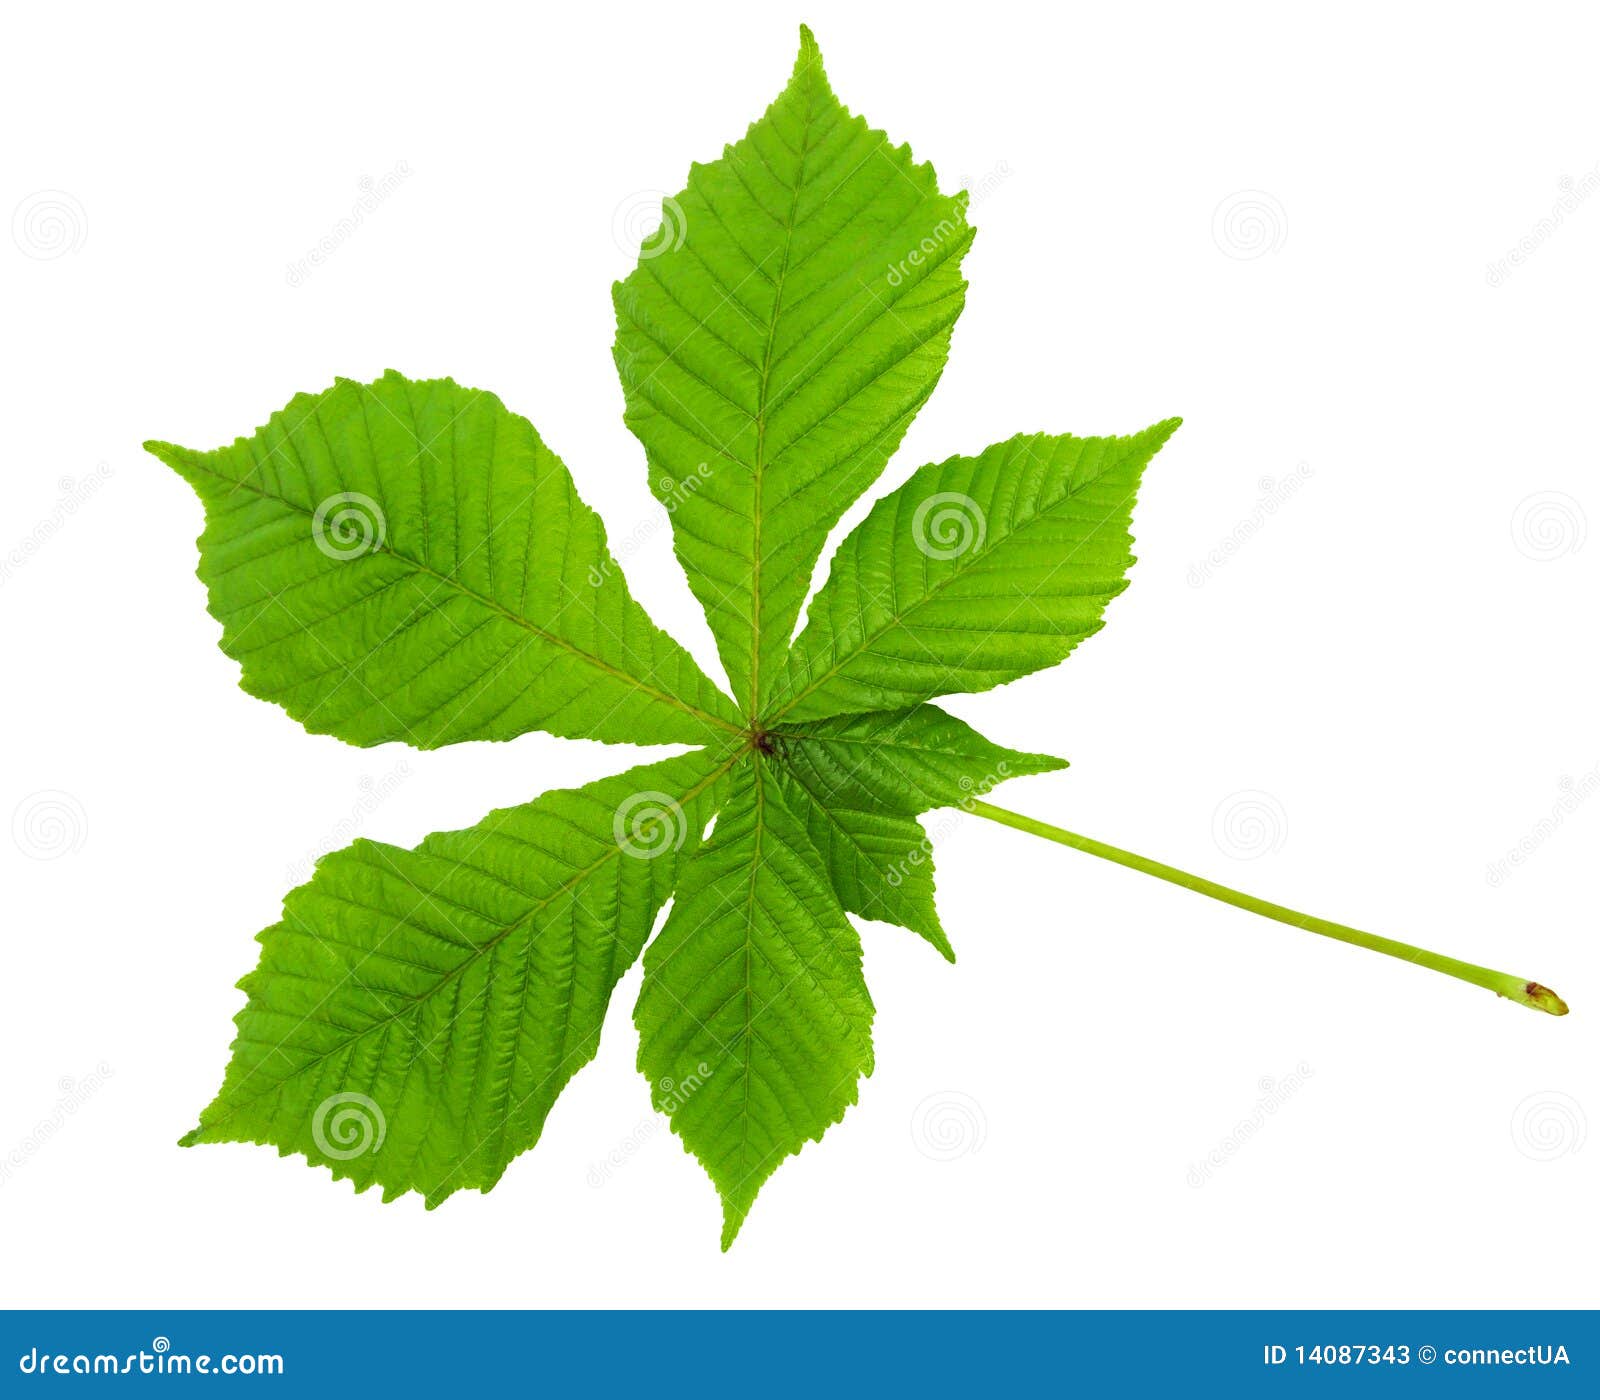 Chestnut leaf stock image. Image of growth, copy, culture - 14087343